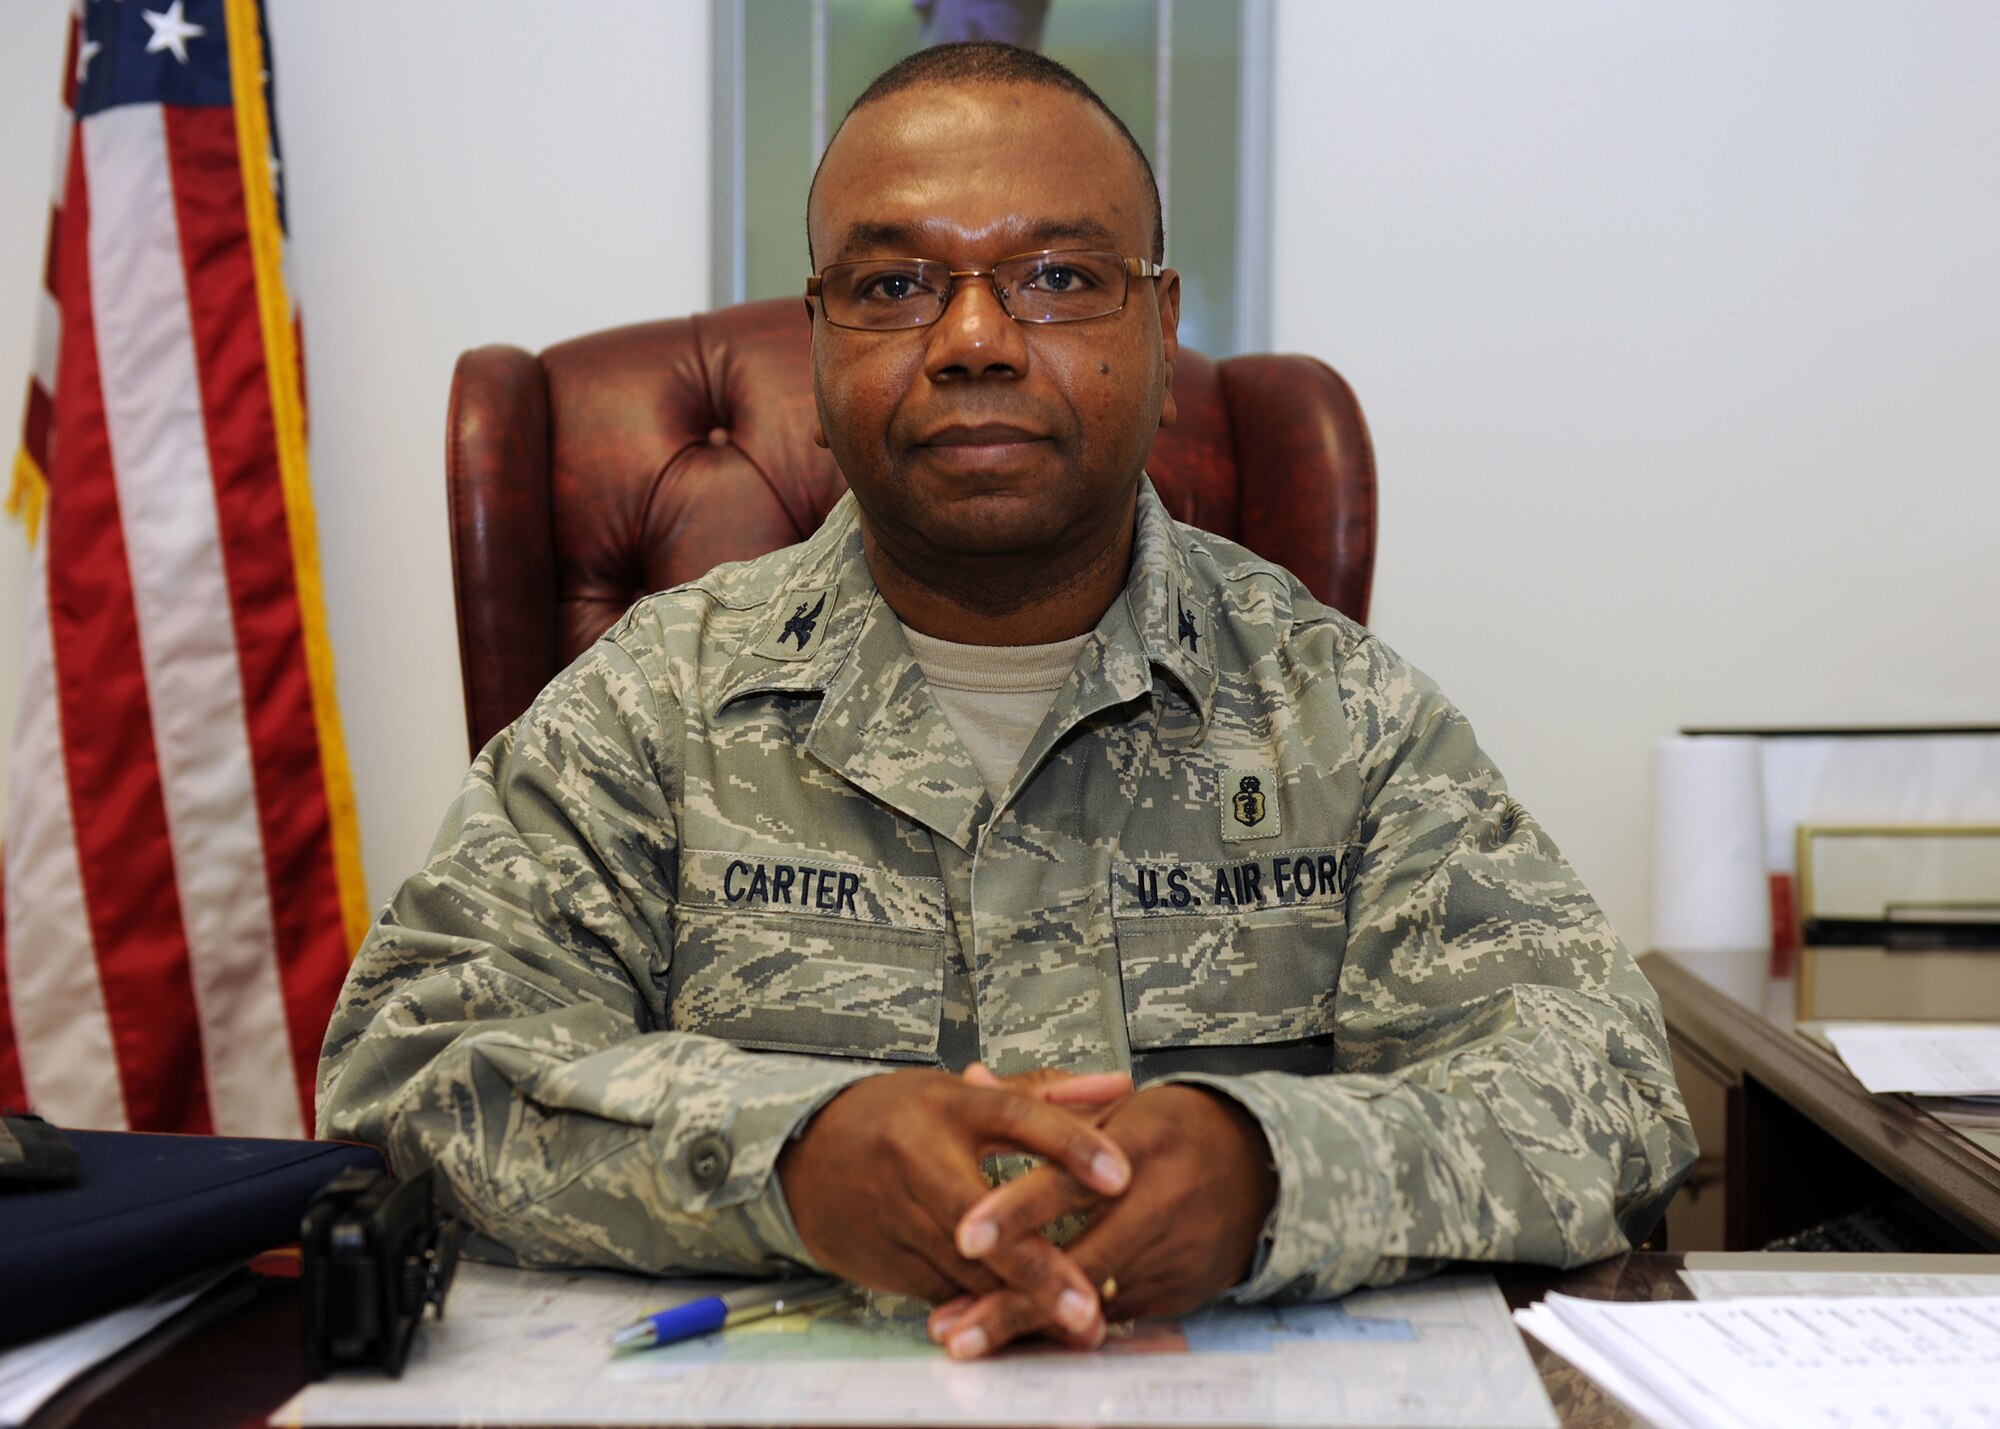 The 174th Fighter Wing Medical Group Commander Col. Wenzell E. Carter, Jr. seated at his desk during the February Unit Training Assembly. (USAF Photo By: Staff Sgt. James N. Faso II/ RELEASED)